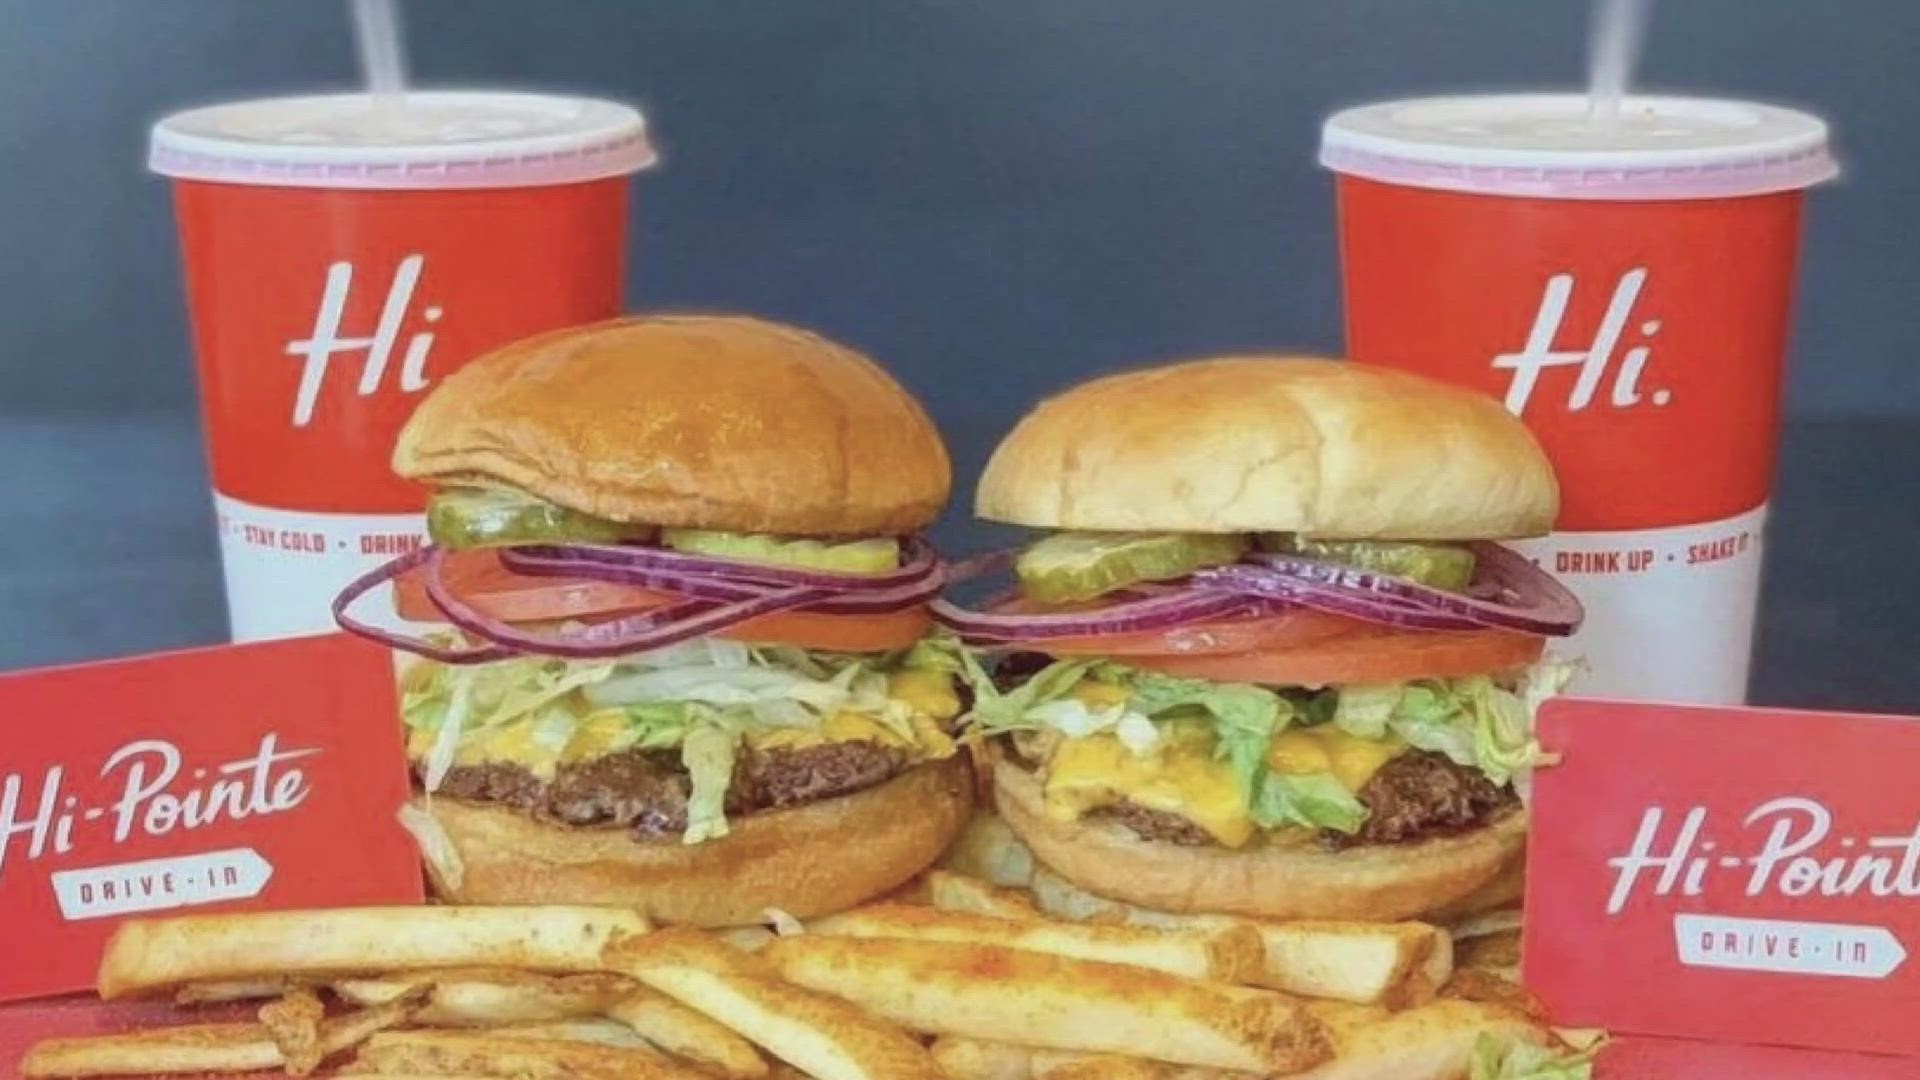 Hi-Pointe Drive-In is opening its first St. Charles County location on March 6. The 3,000-square-foot restaurant is located at 6015 Mid Rivers Mall Drive.